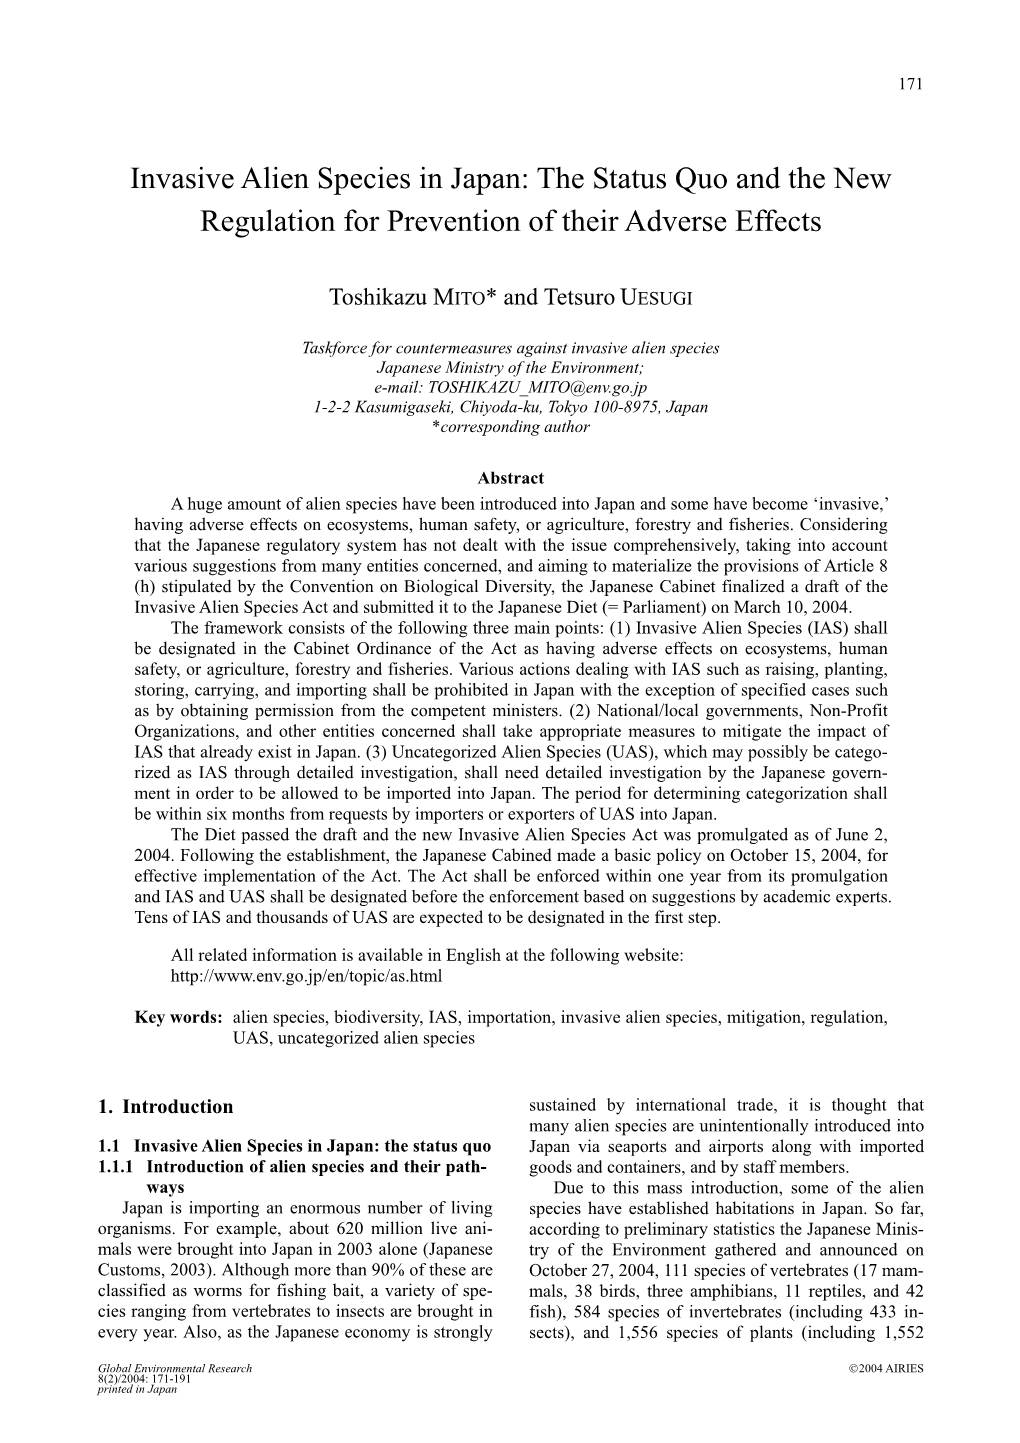 Invasive Alien Species in Japan: the Status Quo and the New Regulation for Prevention of Their Adverse Effects